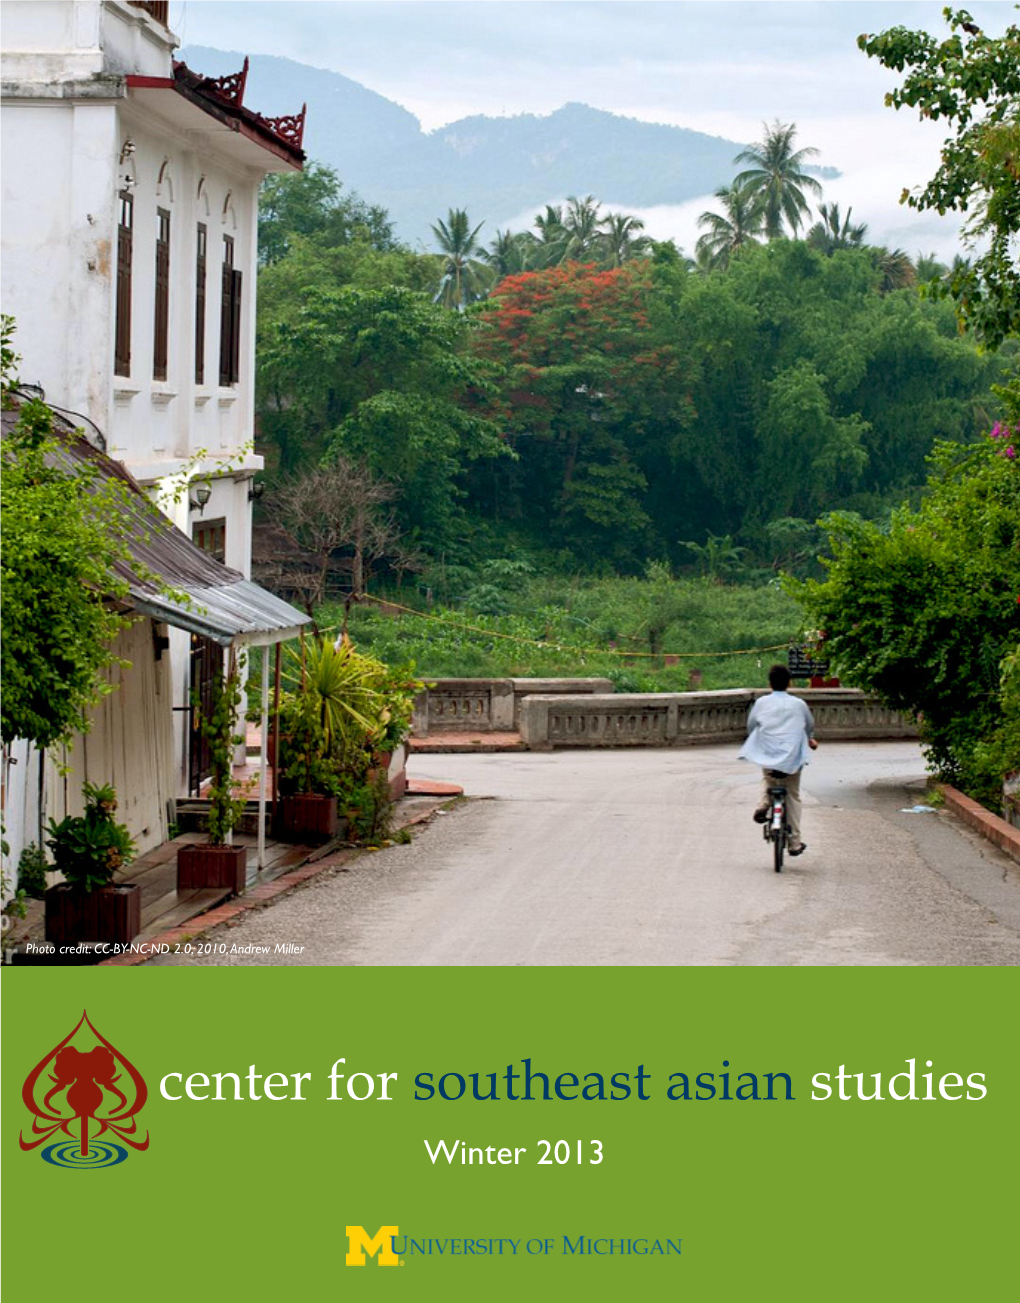 Center for Southeast Asian Studies Winter 2013 Letter from the Director